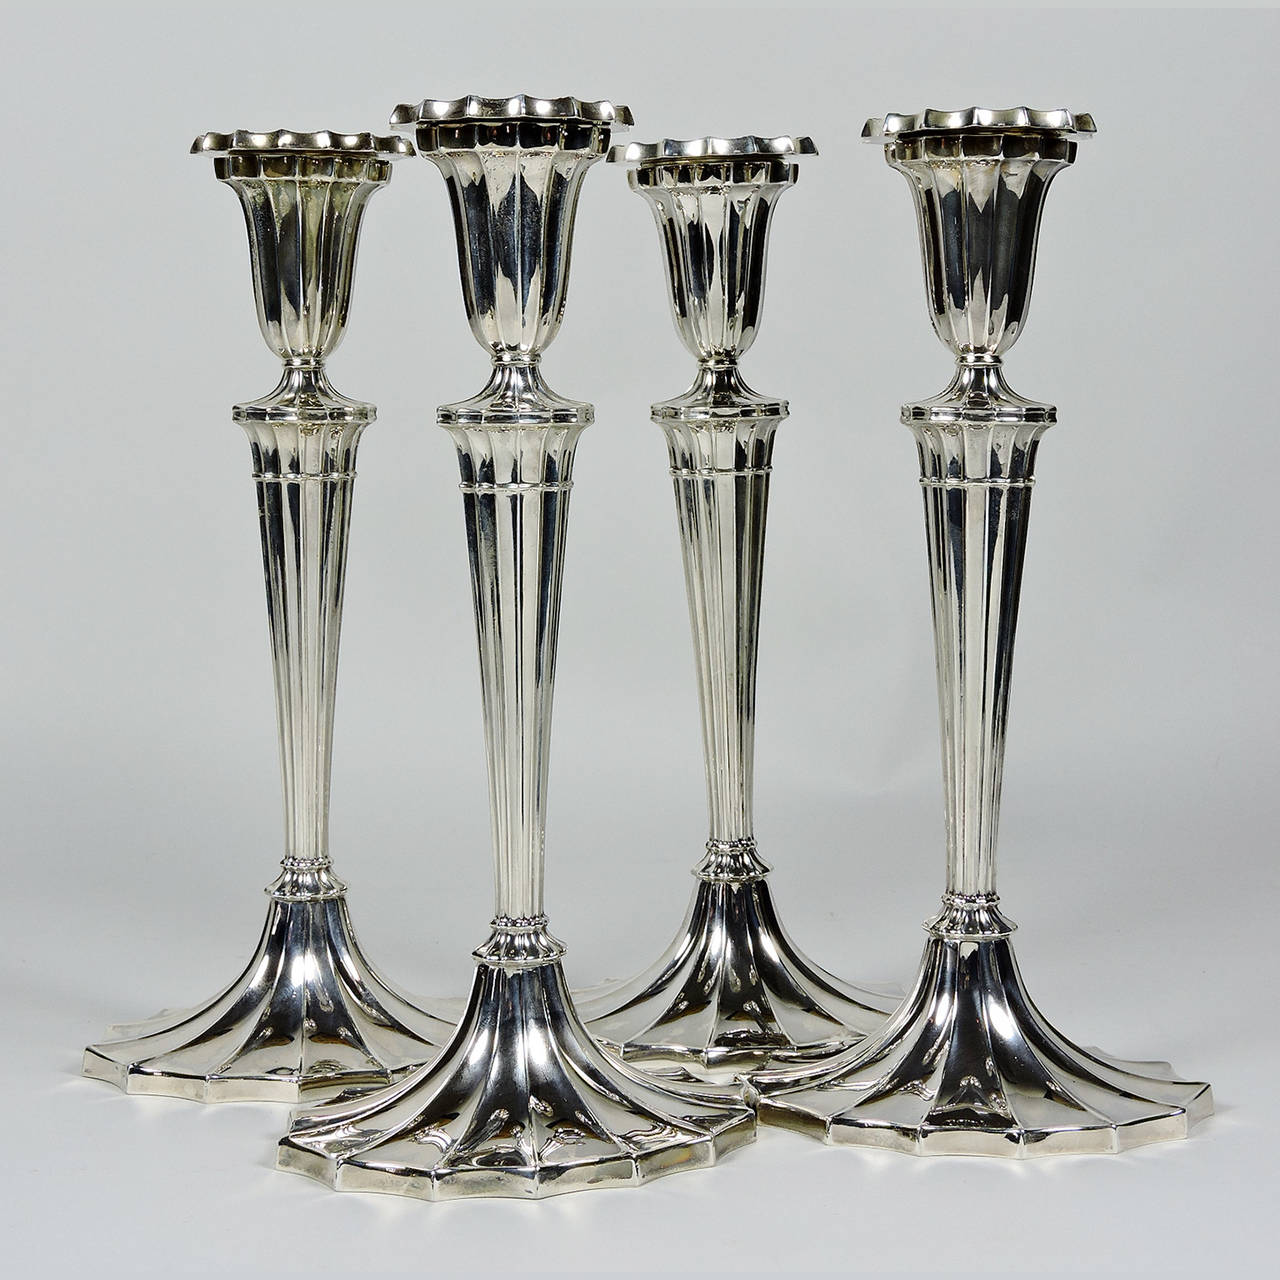 Set of four Gorham silver neoclassical style candlesticks, late 19th century; with fluted and tapered shafts, beaded bobeche and oval base. Marked Gorham, sterling, #231, two date stamped 1894 and two stamped 1895. Approximate total weight: 63.94 oz.